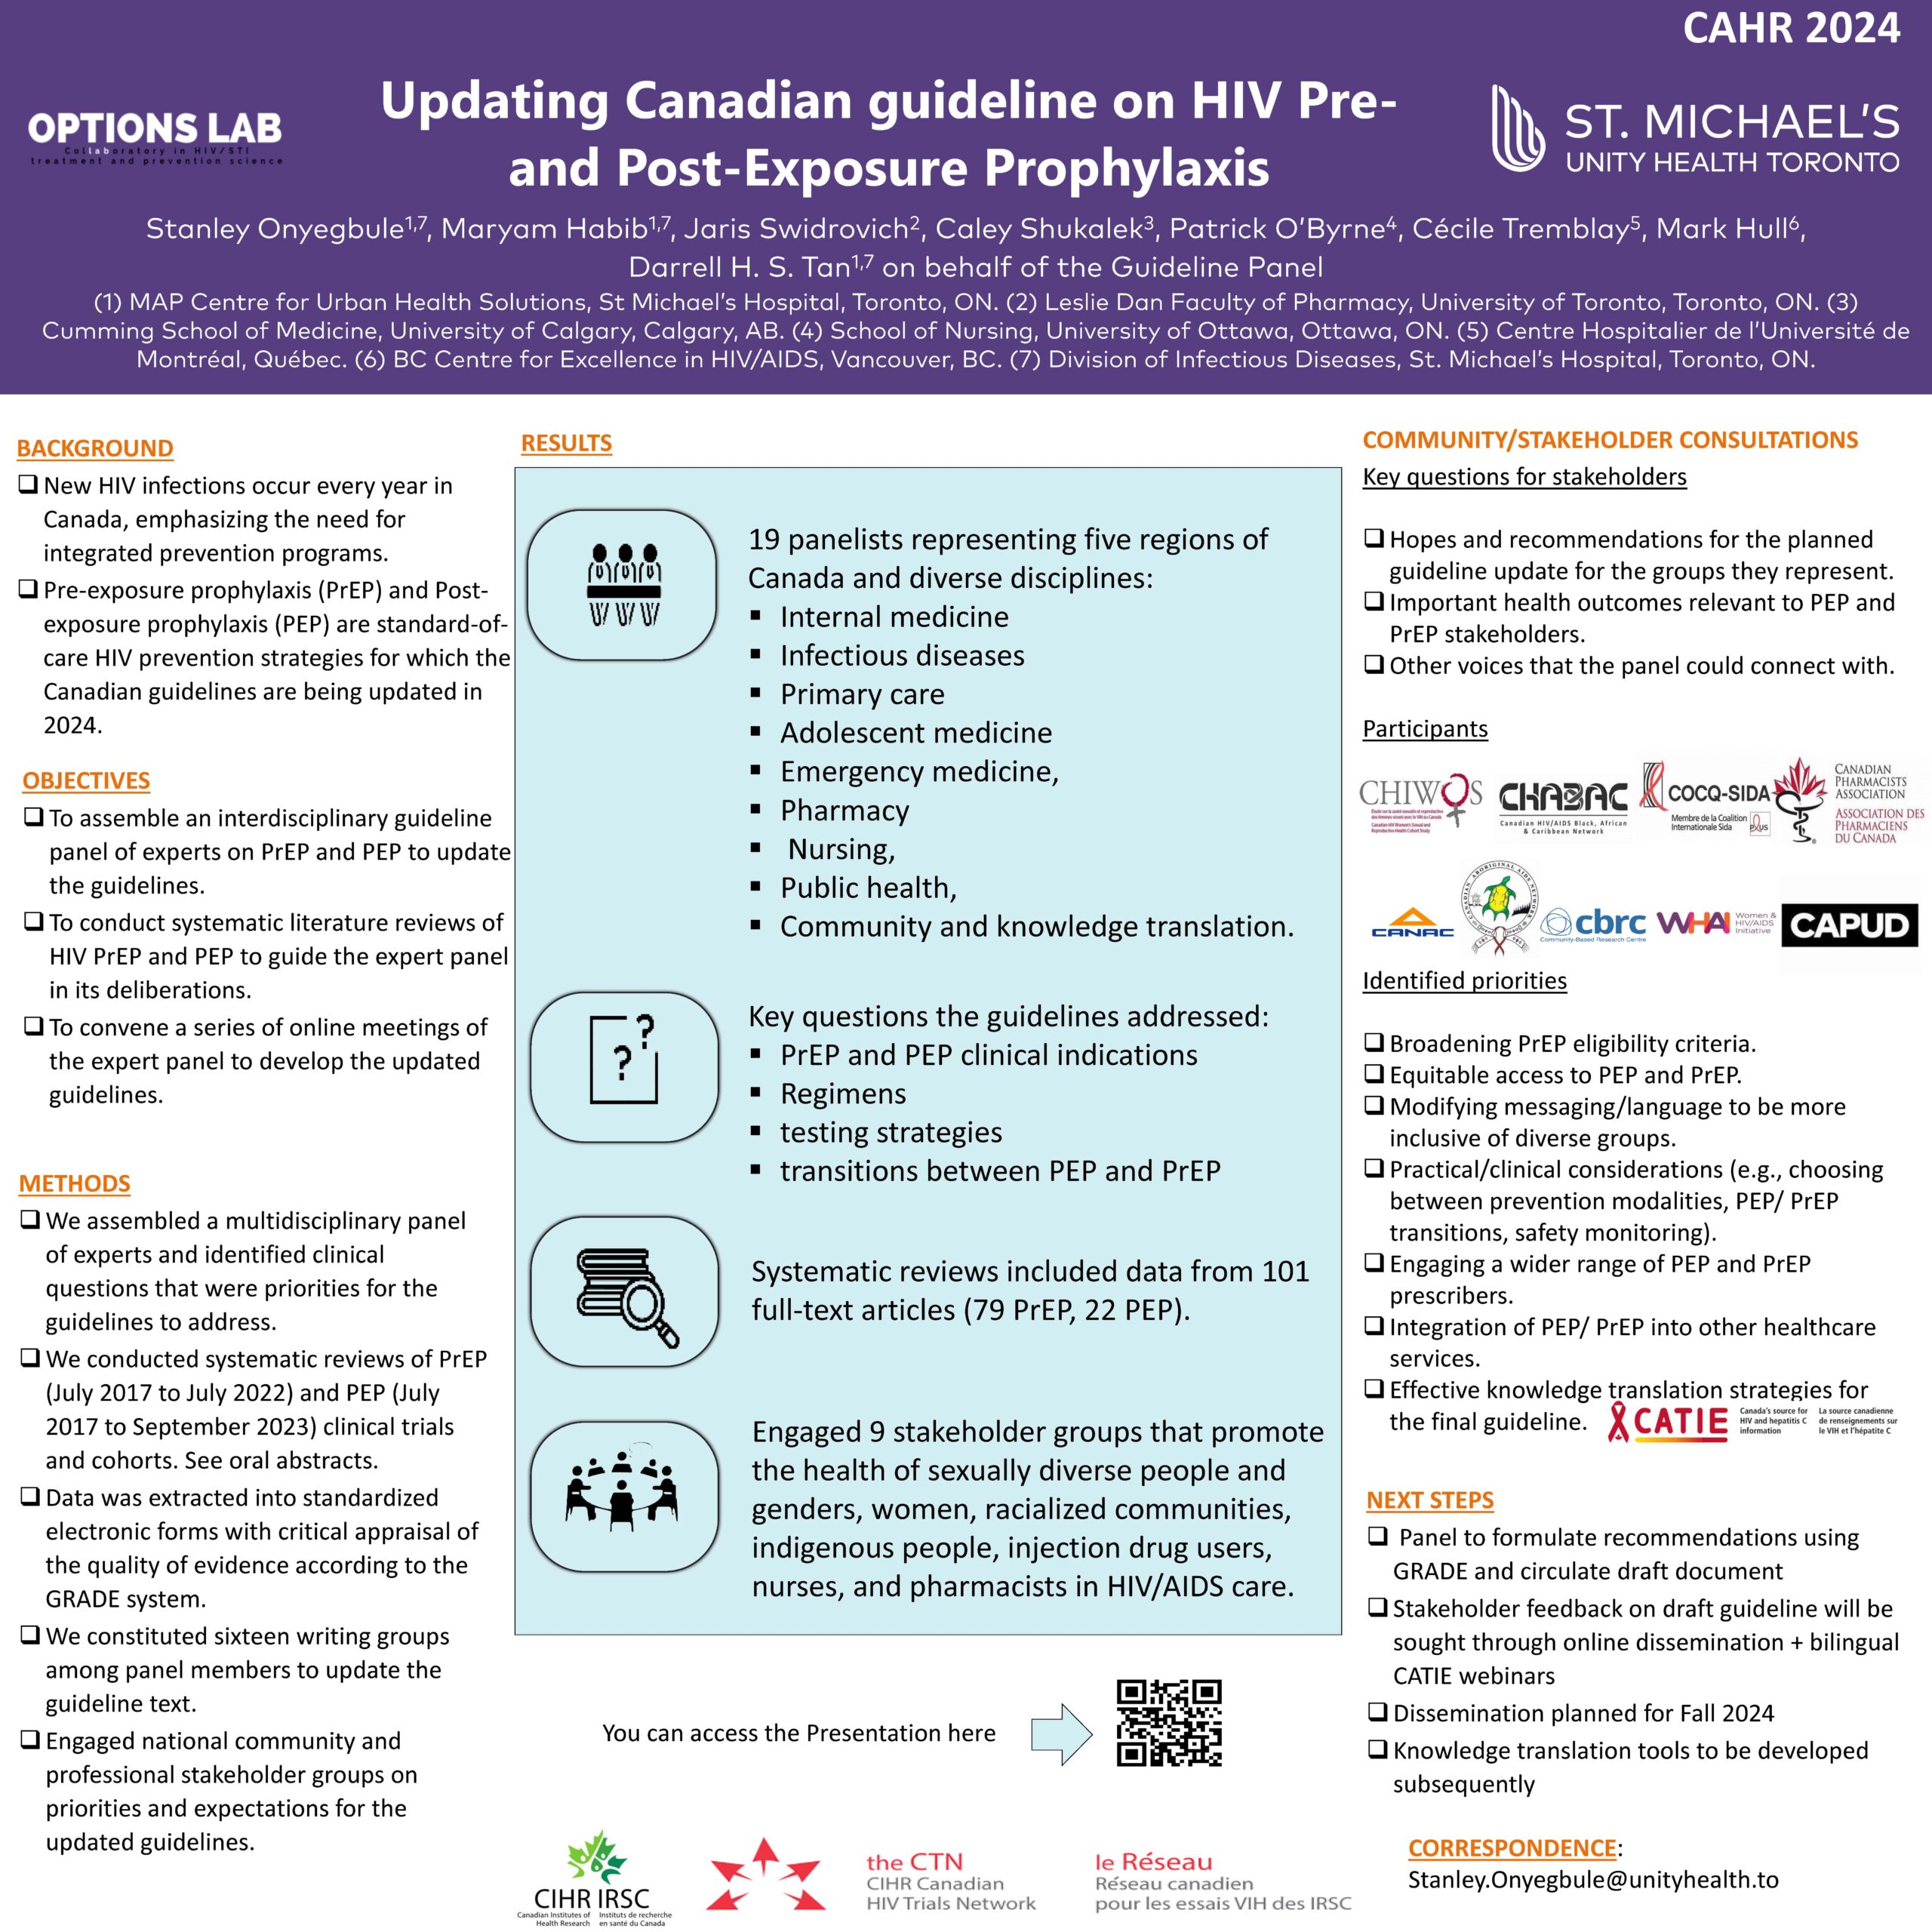 CAHR 2024_Updating Canadian Guidelines